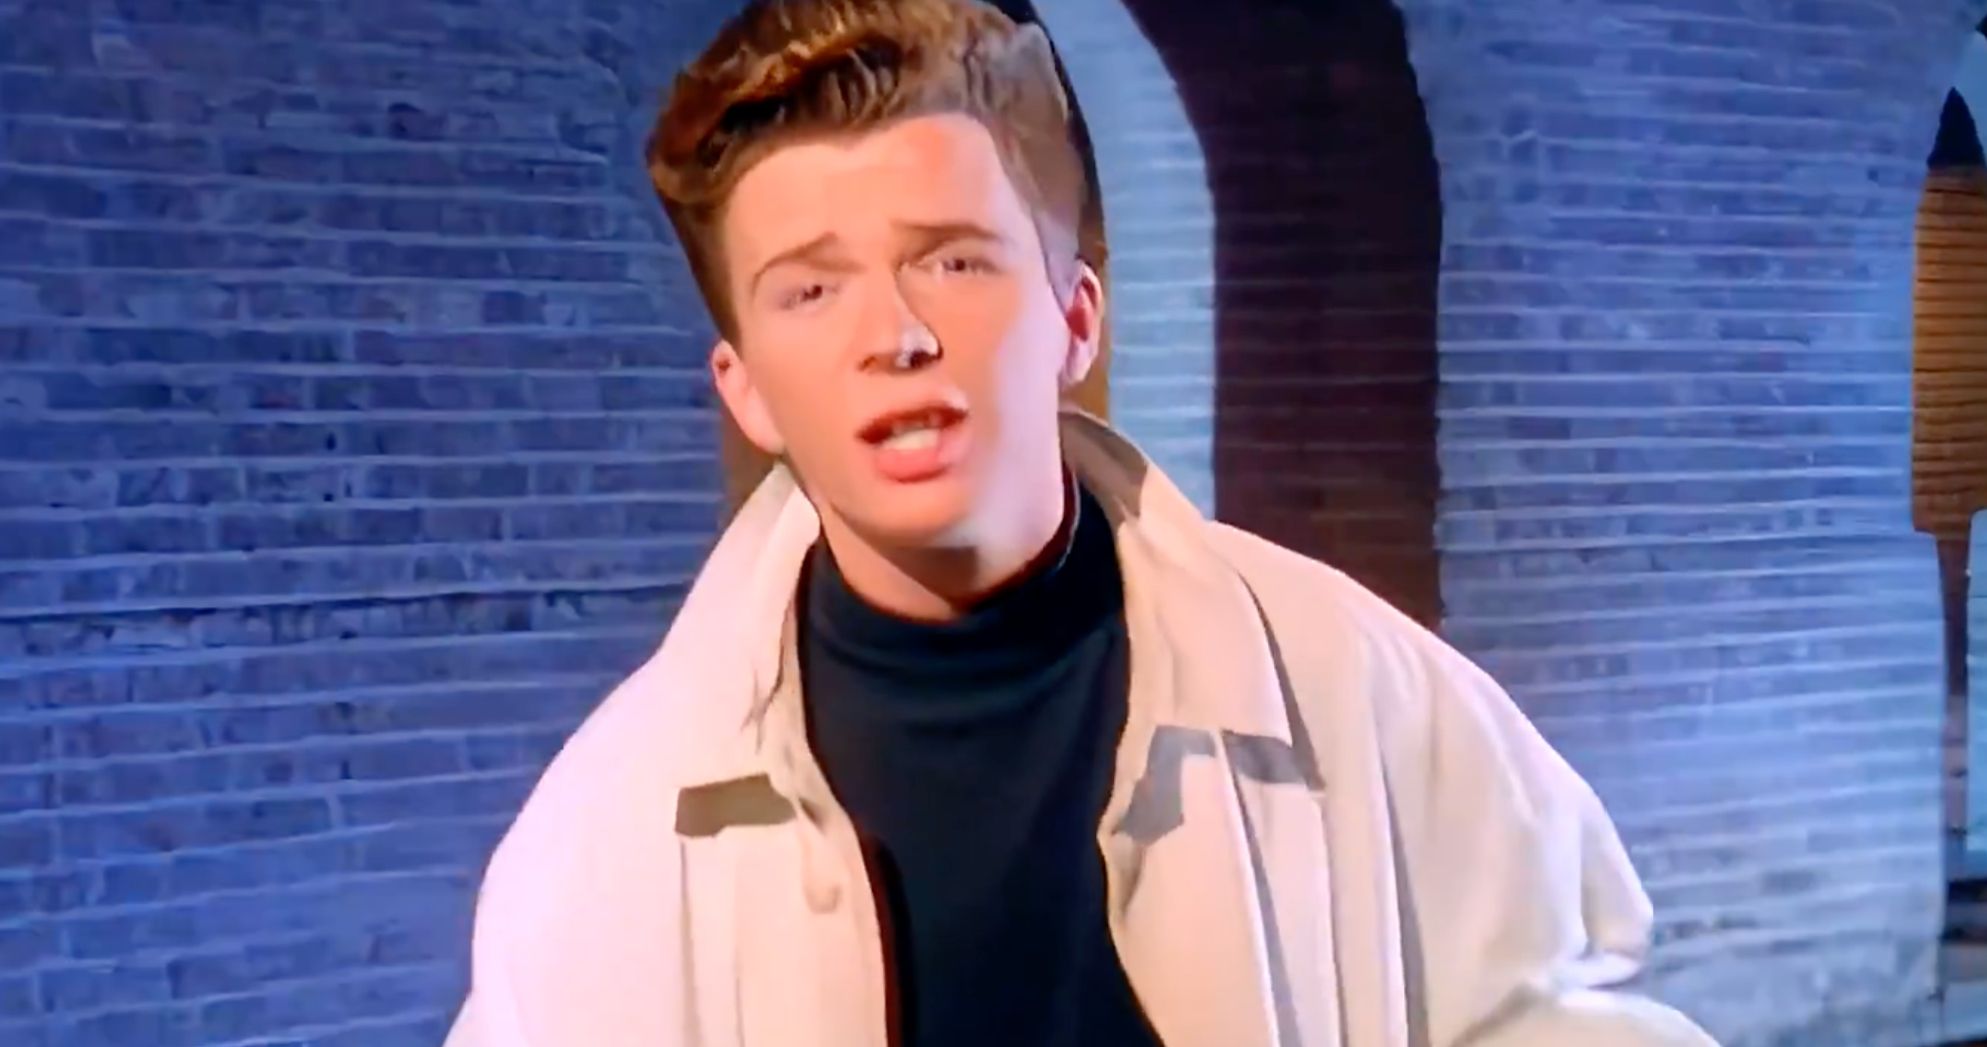 Rick Astley Teams With CSAA for New 'Never Gonna Give You Up' Campaign